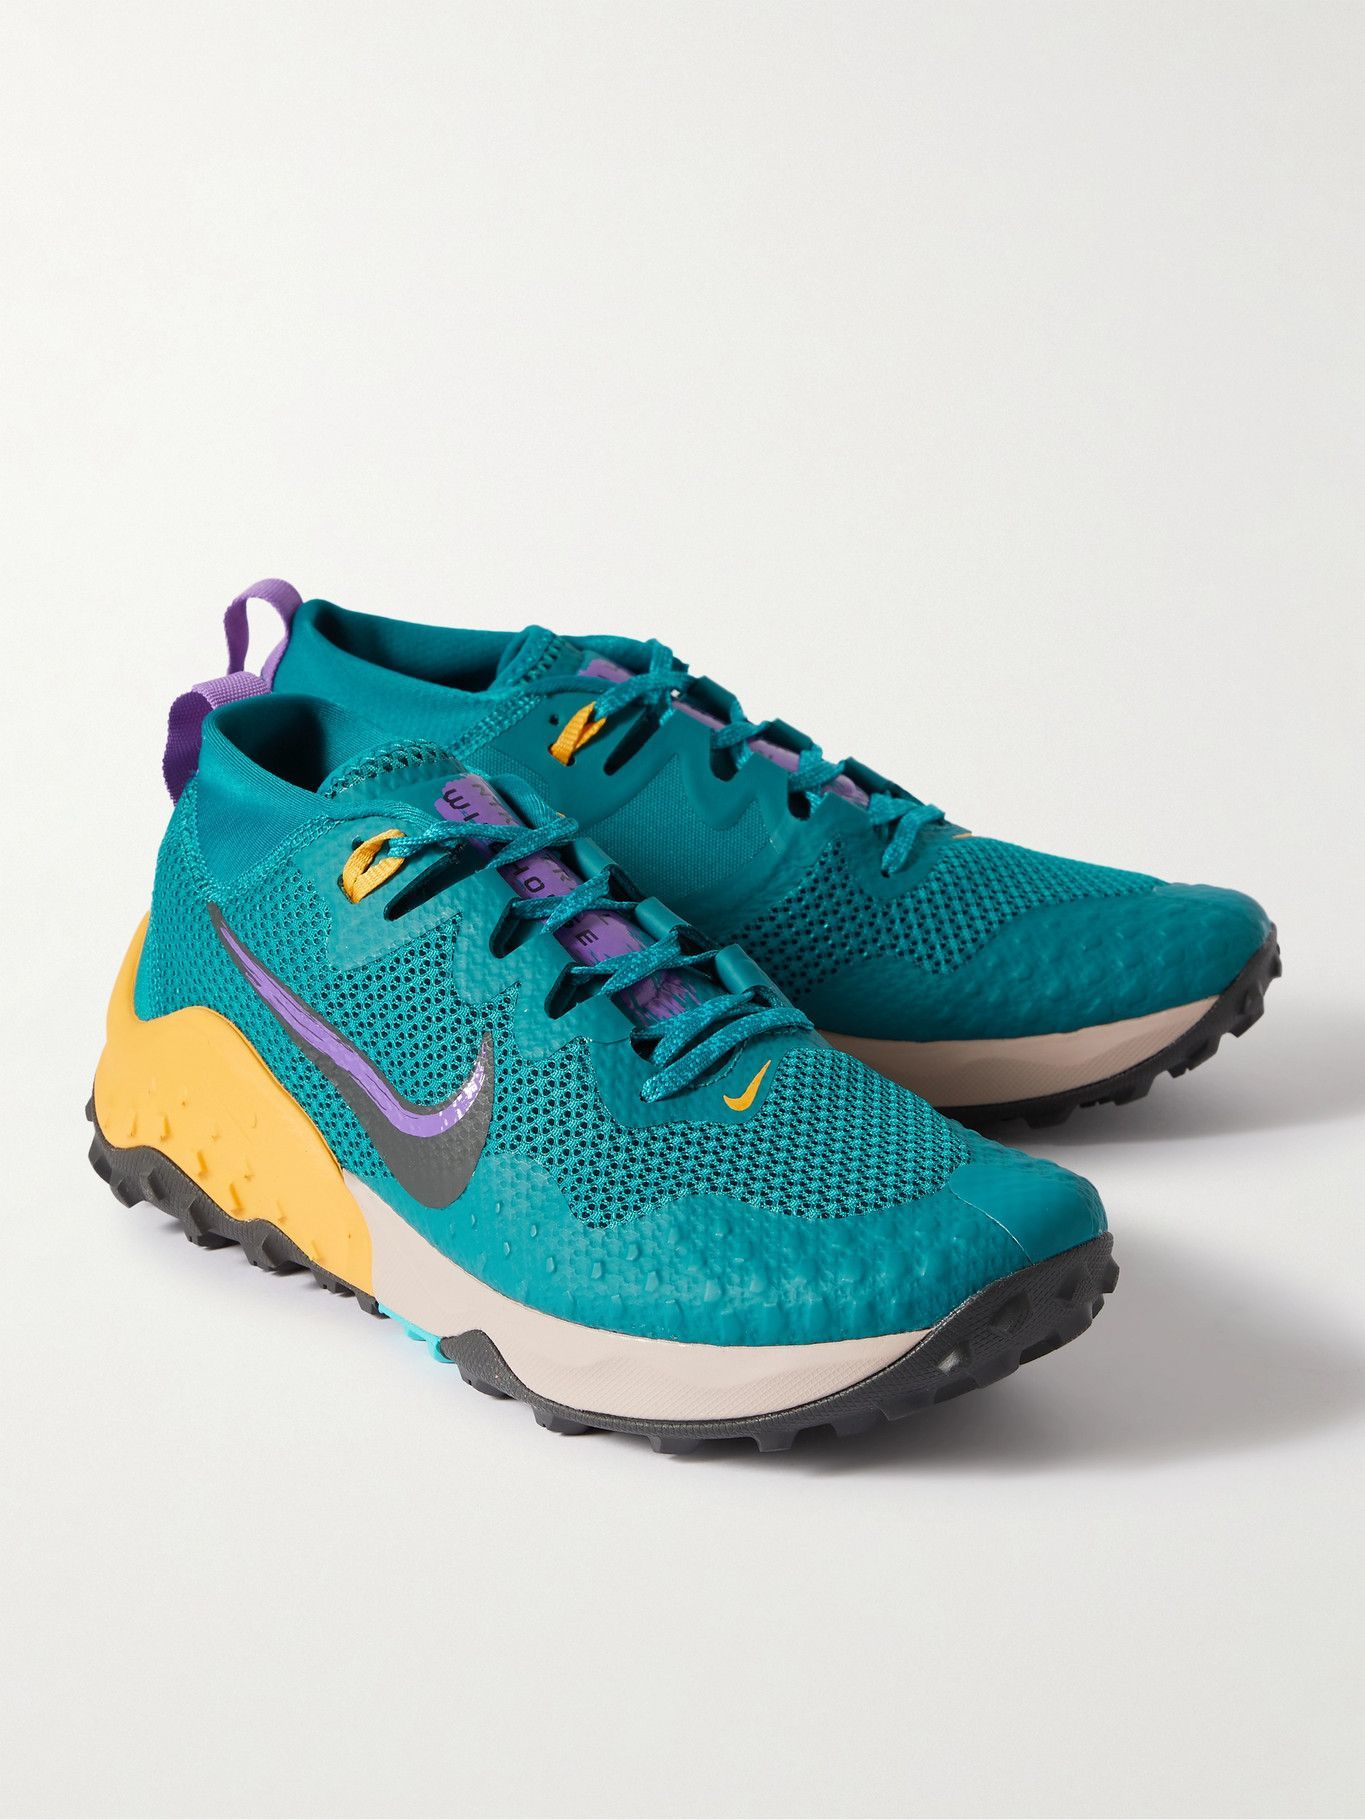 NIKE RUNNING - Nike Wildhorse 7 Canvas, Rubber and Mesh Running Sneakers - Blue